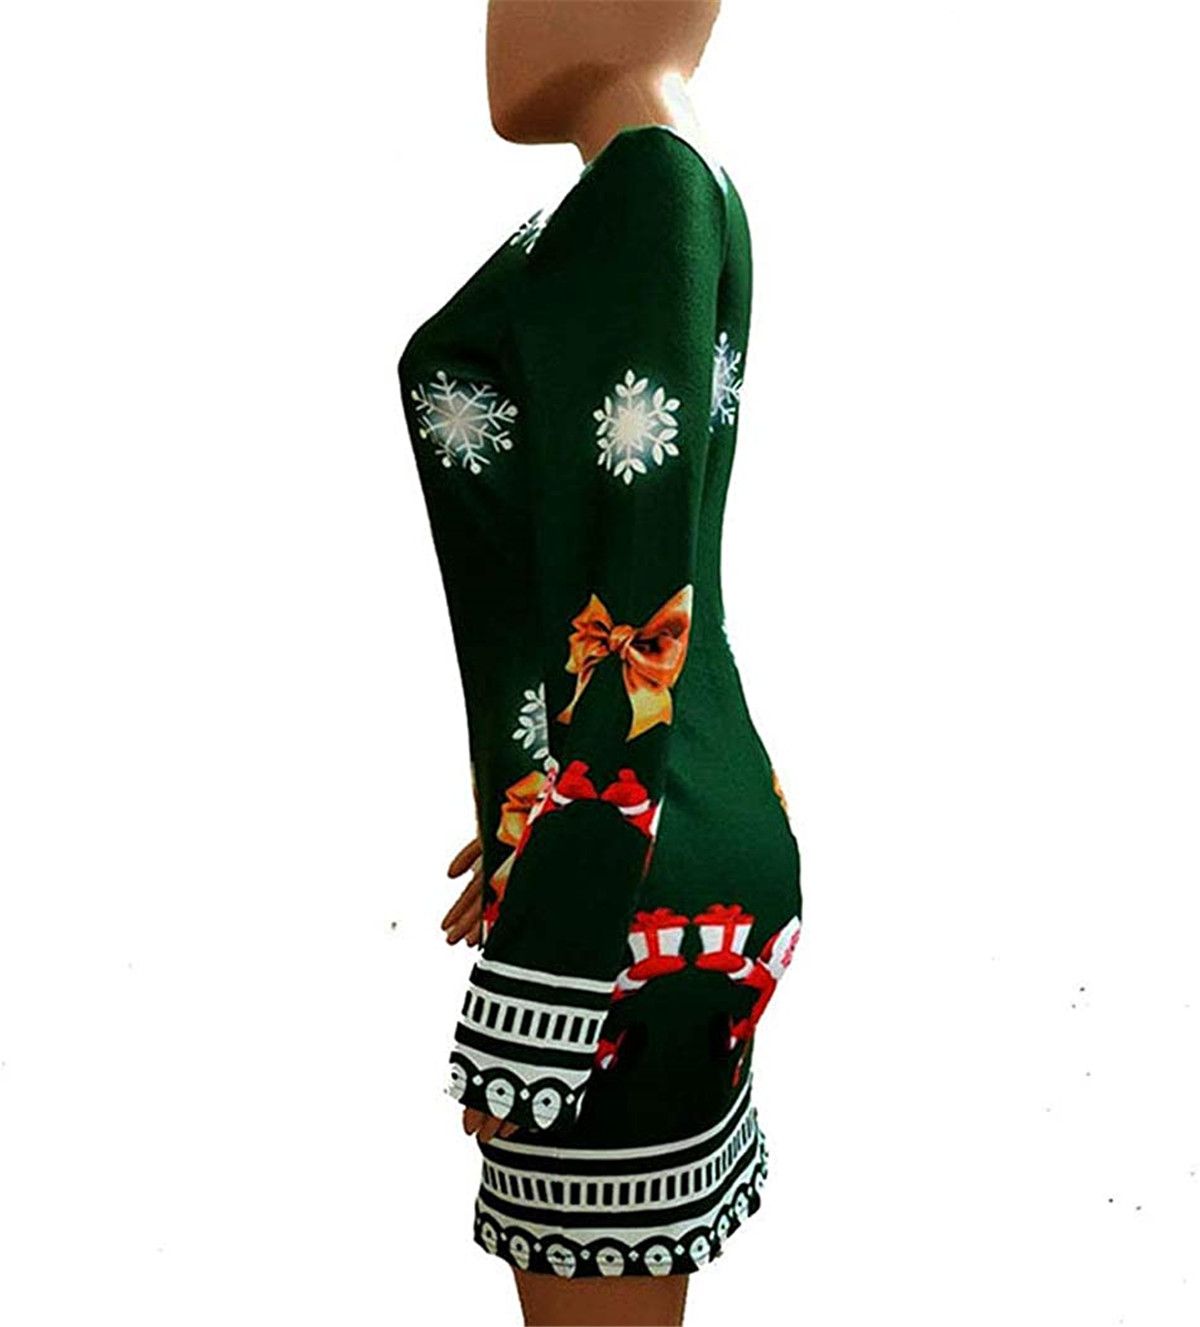 Kiapeise Kiapeise Women Ugly Christmas Sweater Dress Themed Print Long Sleeve Round Neck Dress Fall and Winter Clothes - image 2 of 6